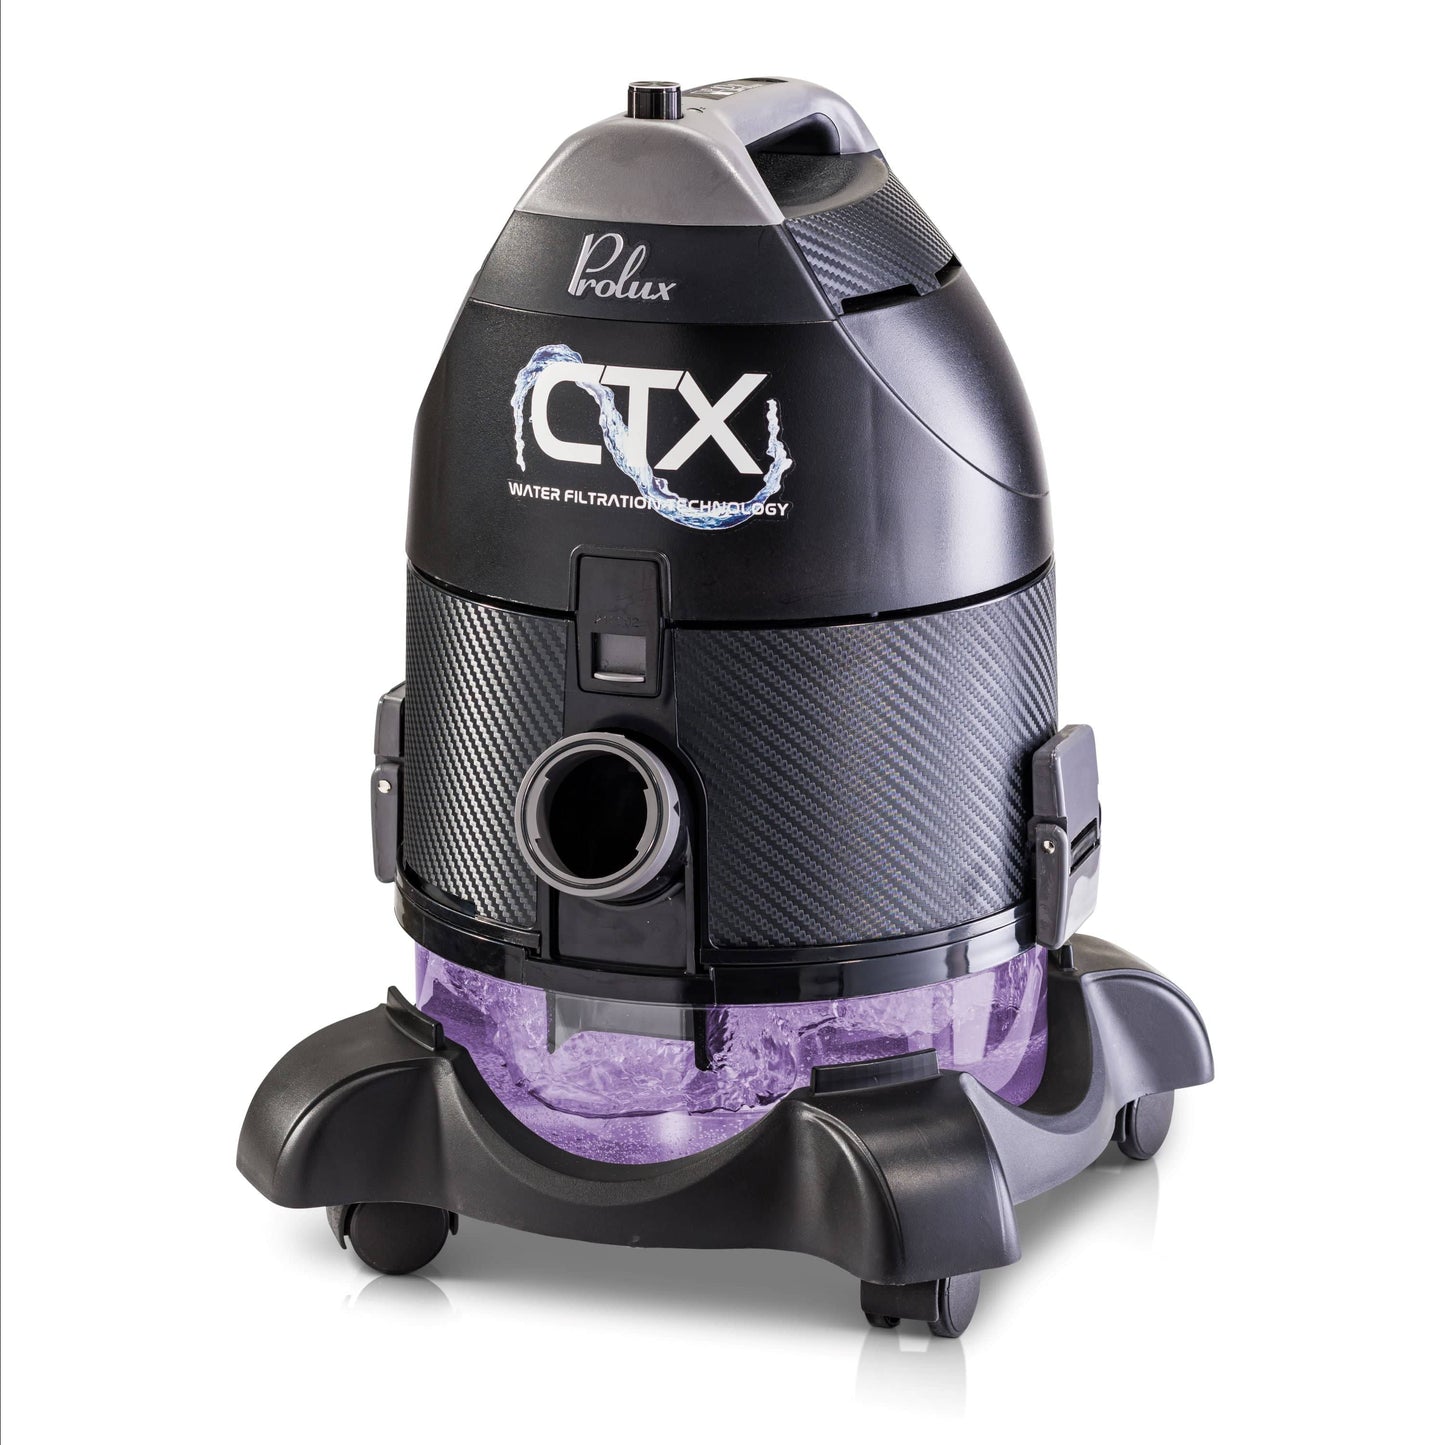 Prolux CTX PET Water Filtration Bagless Canister Vacuum Cleaner